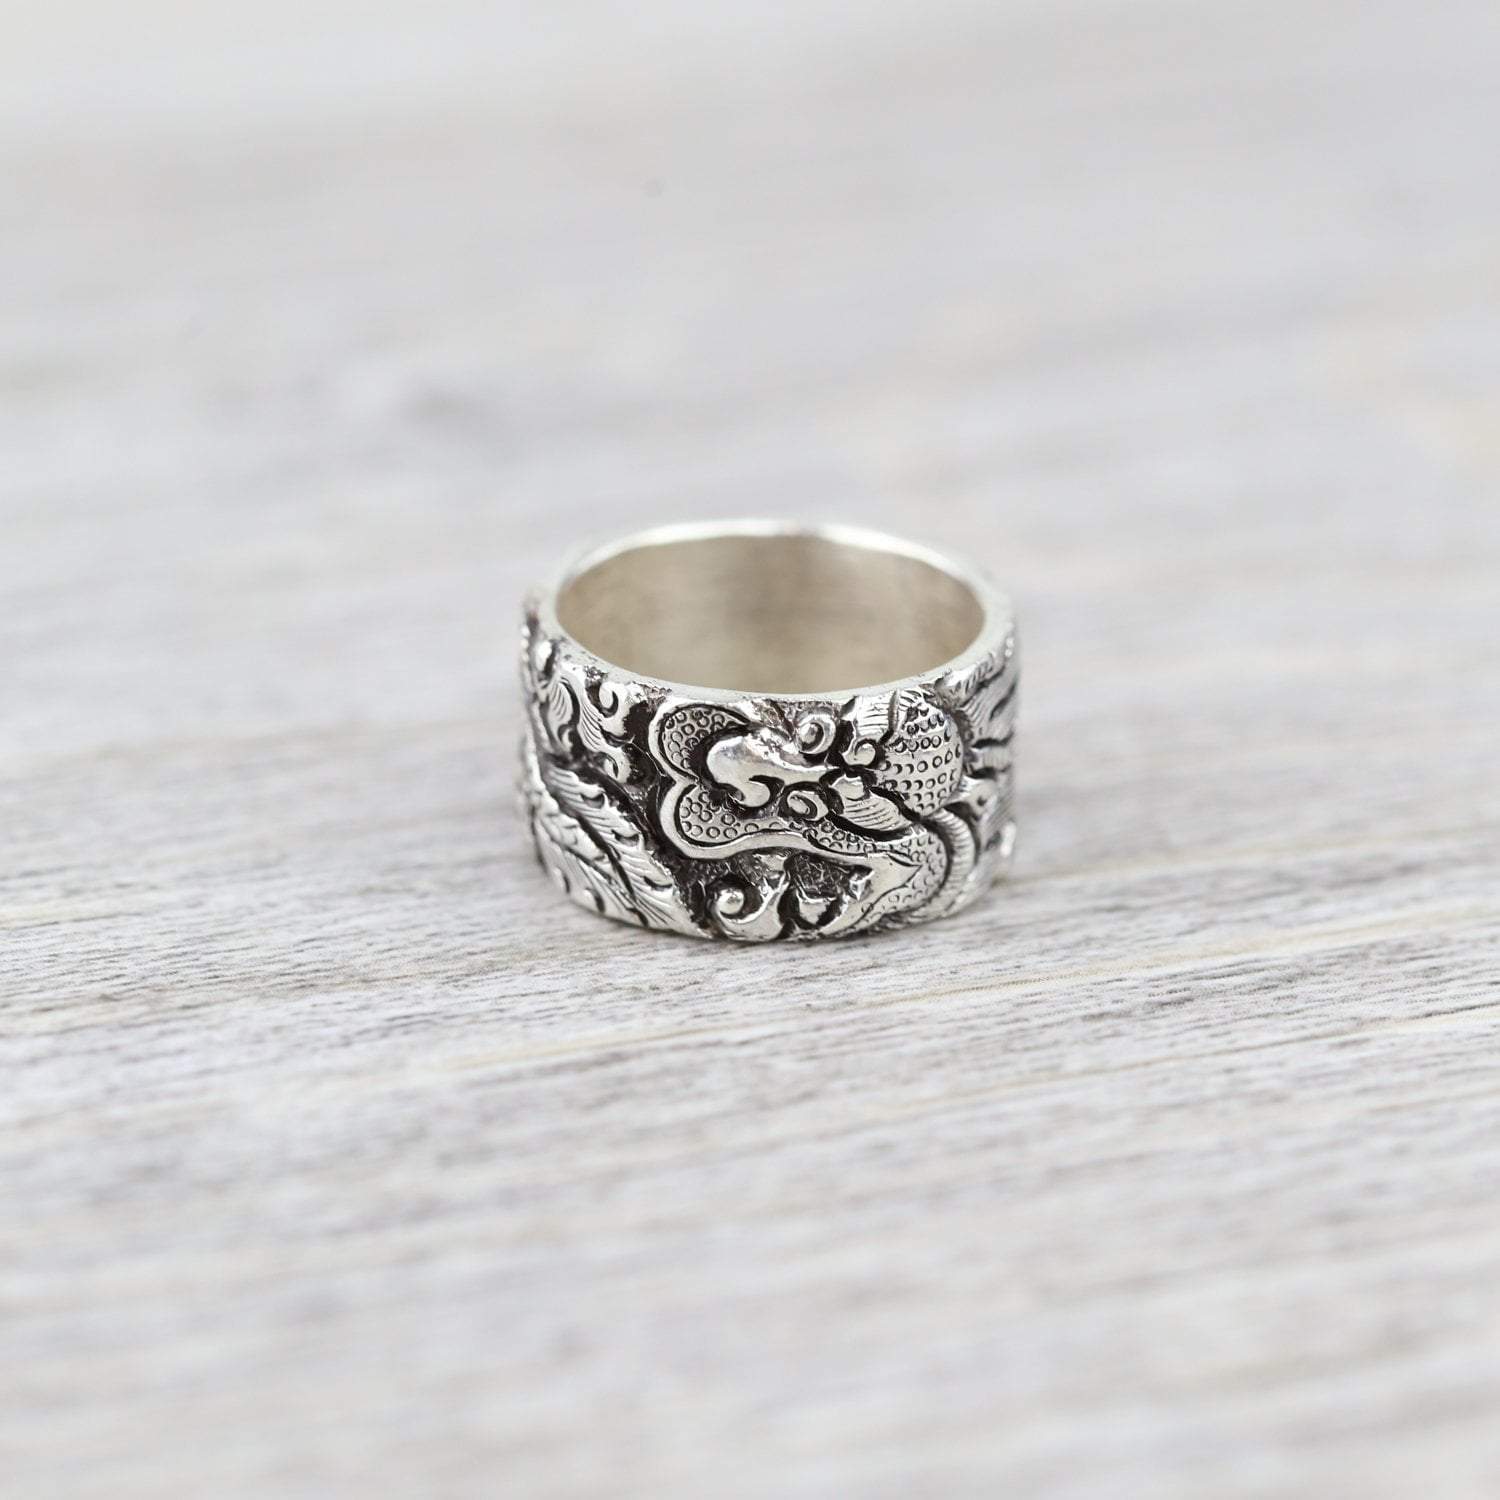 Fearless Dragon Ring